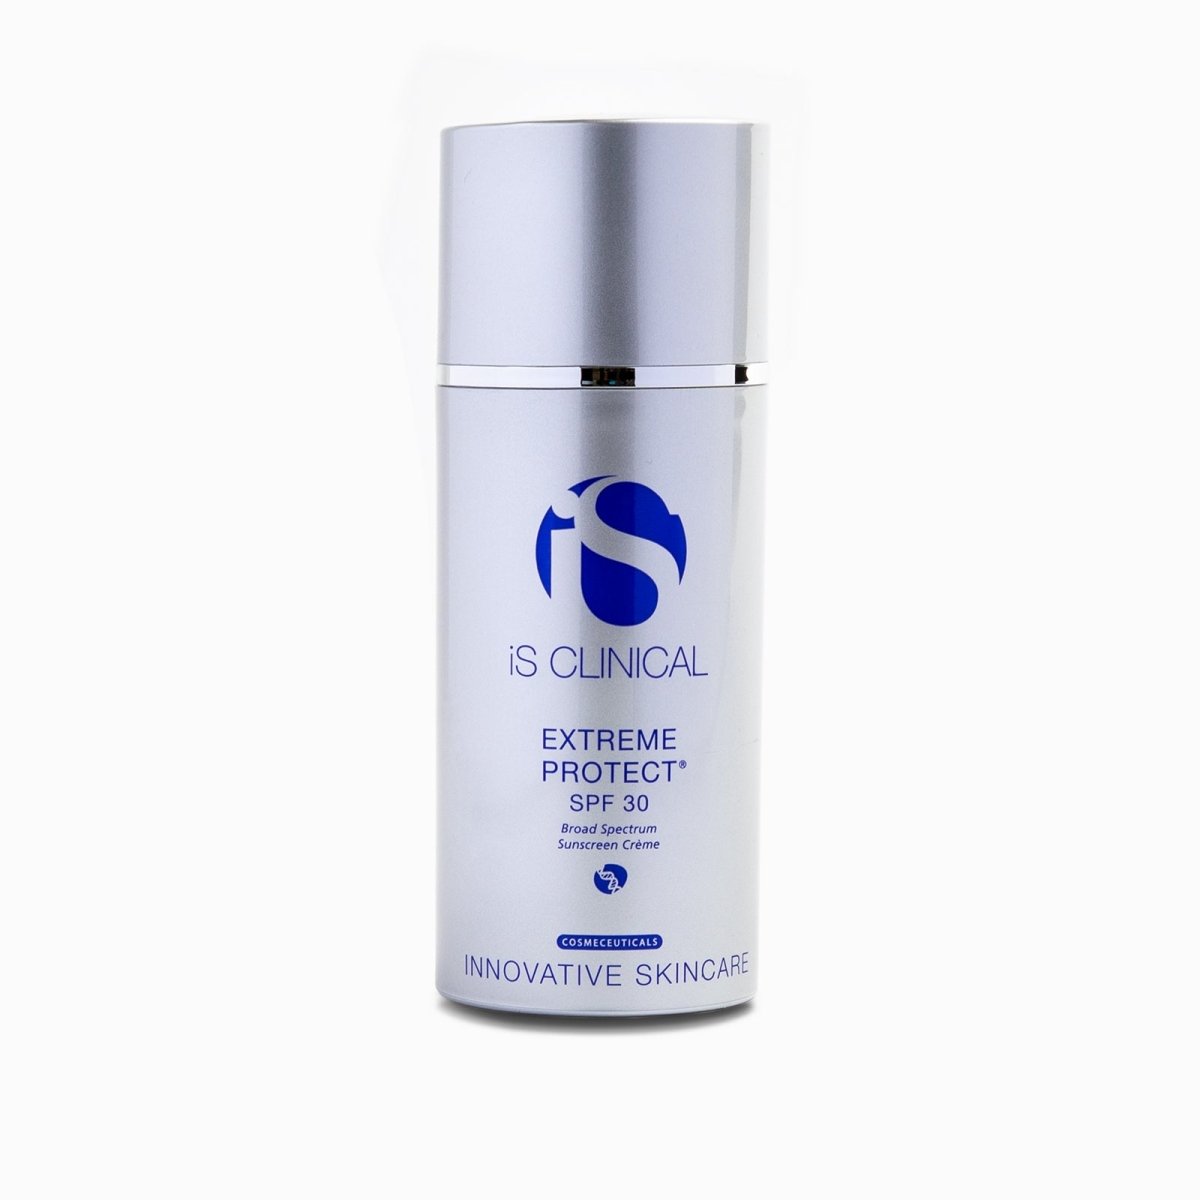 iS Clinical Extreme Protect SPF 30 – SkincareEssentials